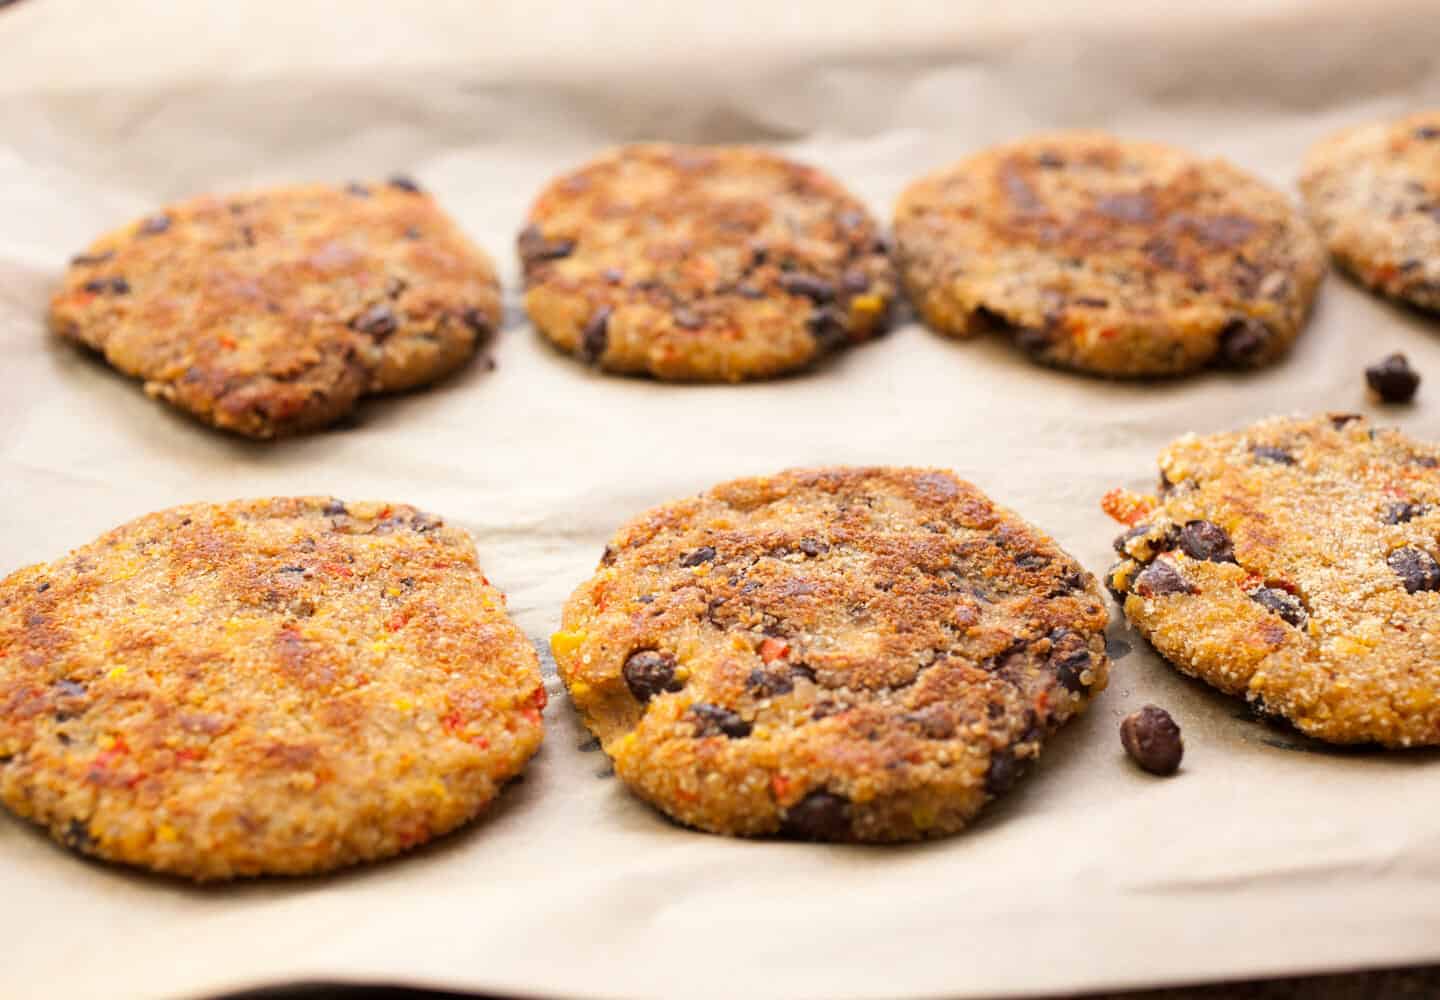 Kiddo Quinoa Veggie Burgers: These simple homemade quinoa burgers are filled with black beans, red peppers, sweet corn, and just enough spice. Perfect for kiddos! | macheesmo.com